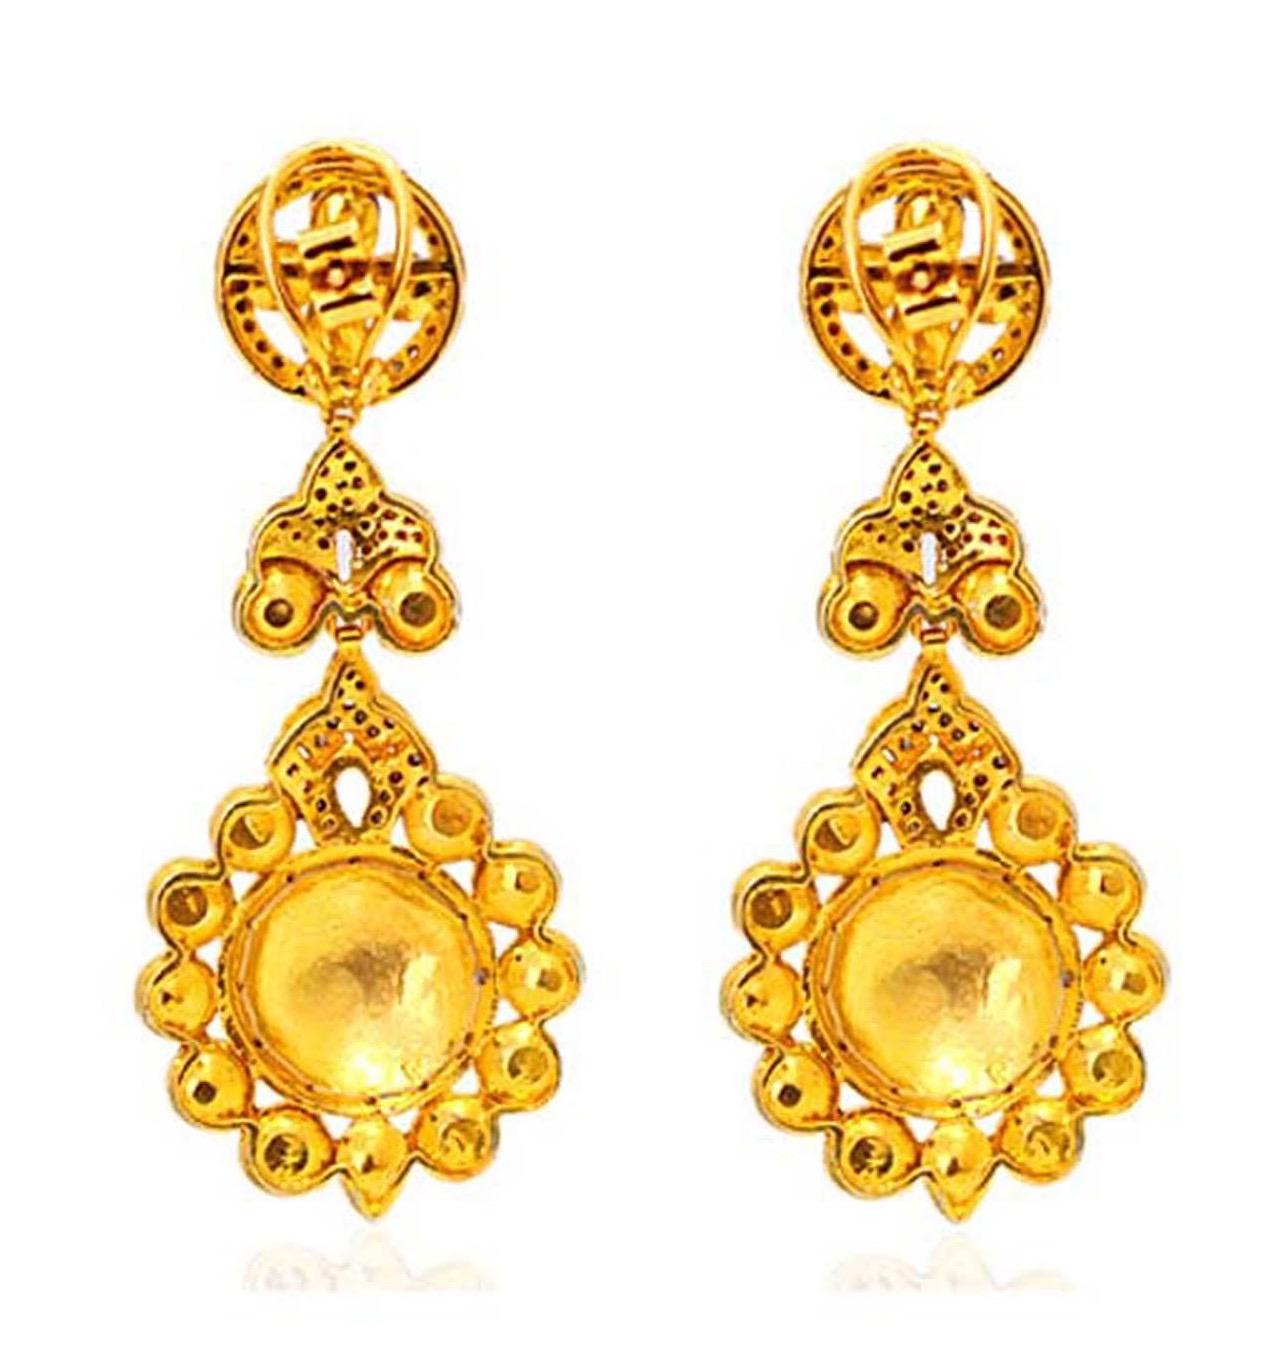 Handcrafted from 18-karat gold and sterling silver. These beautiful earrings are set with 4.75 carats pearl and 2.49 carats of rose cut diamonds.

FOLLOW  MEGHNA JEWELS storefront to view the latest collection & exclusive pieces.  Meghna Jewels is